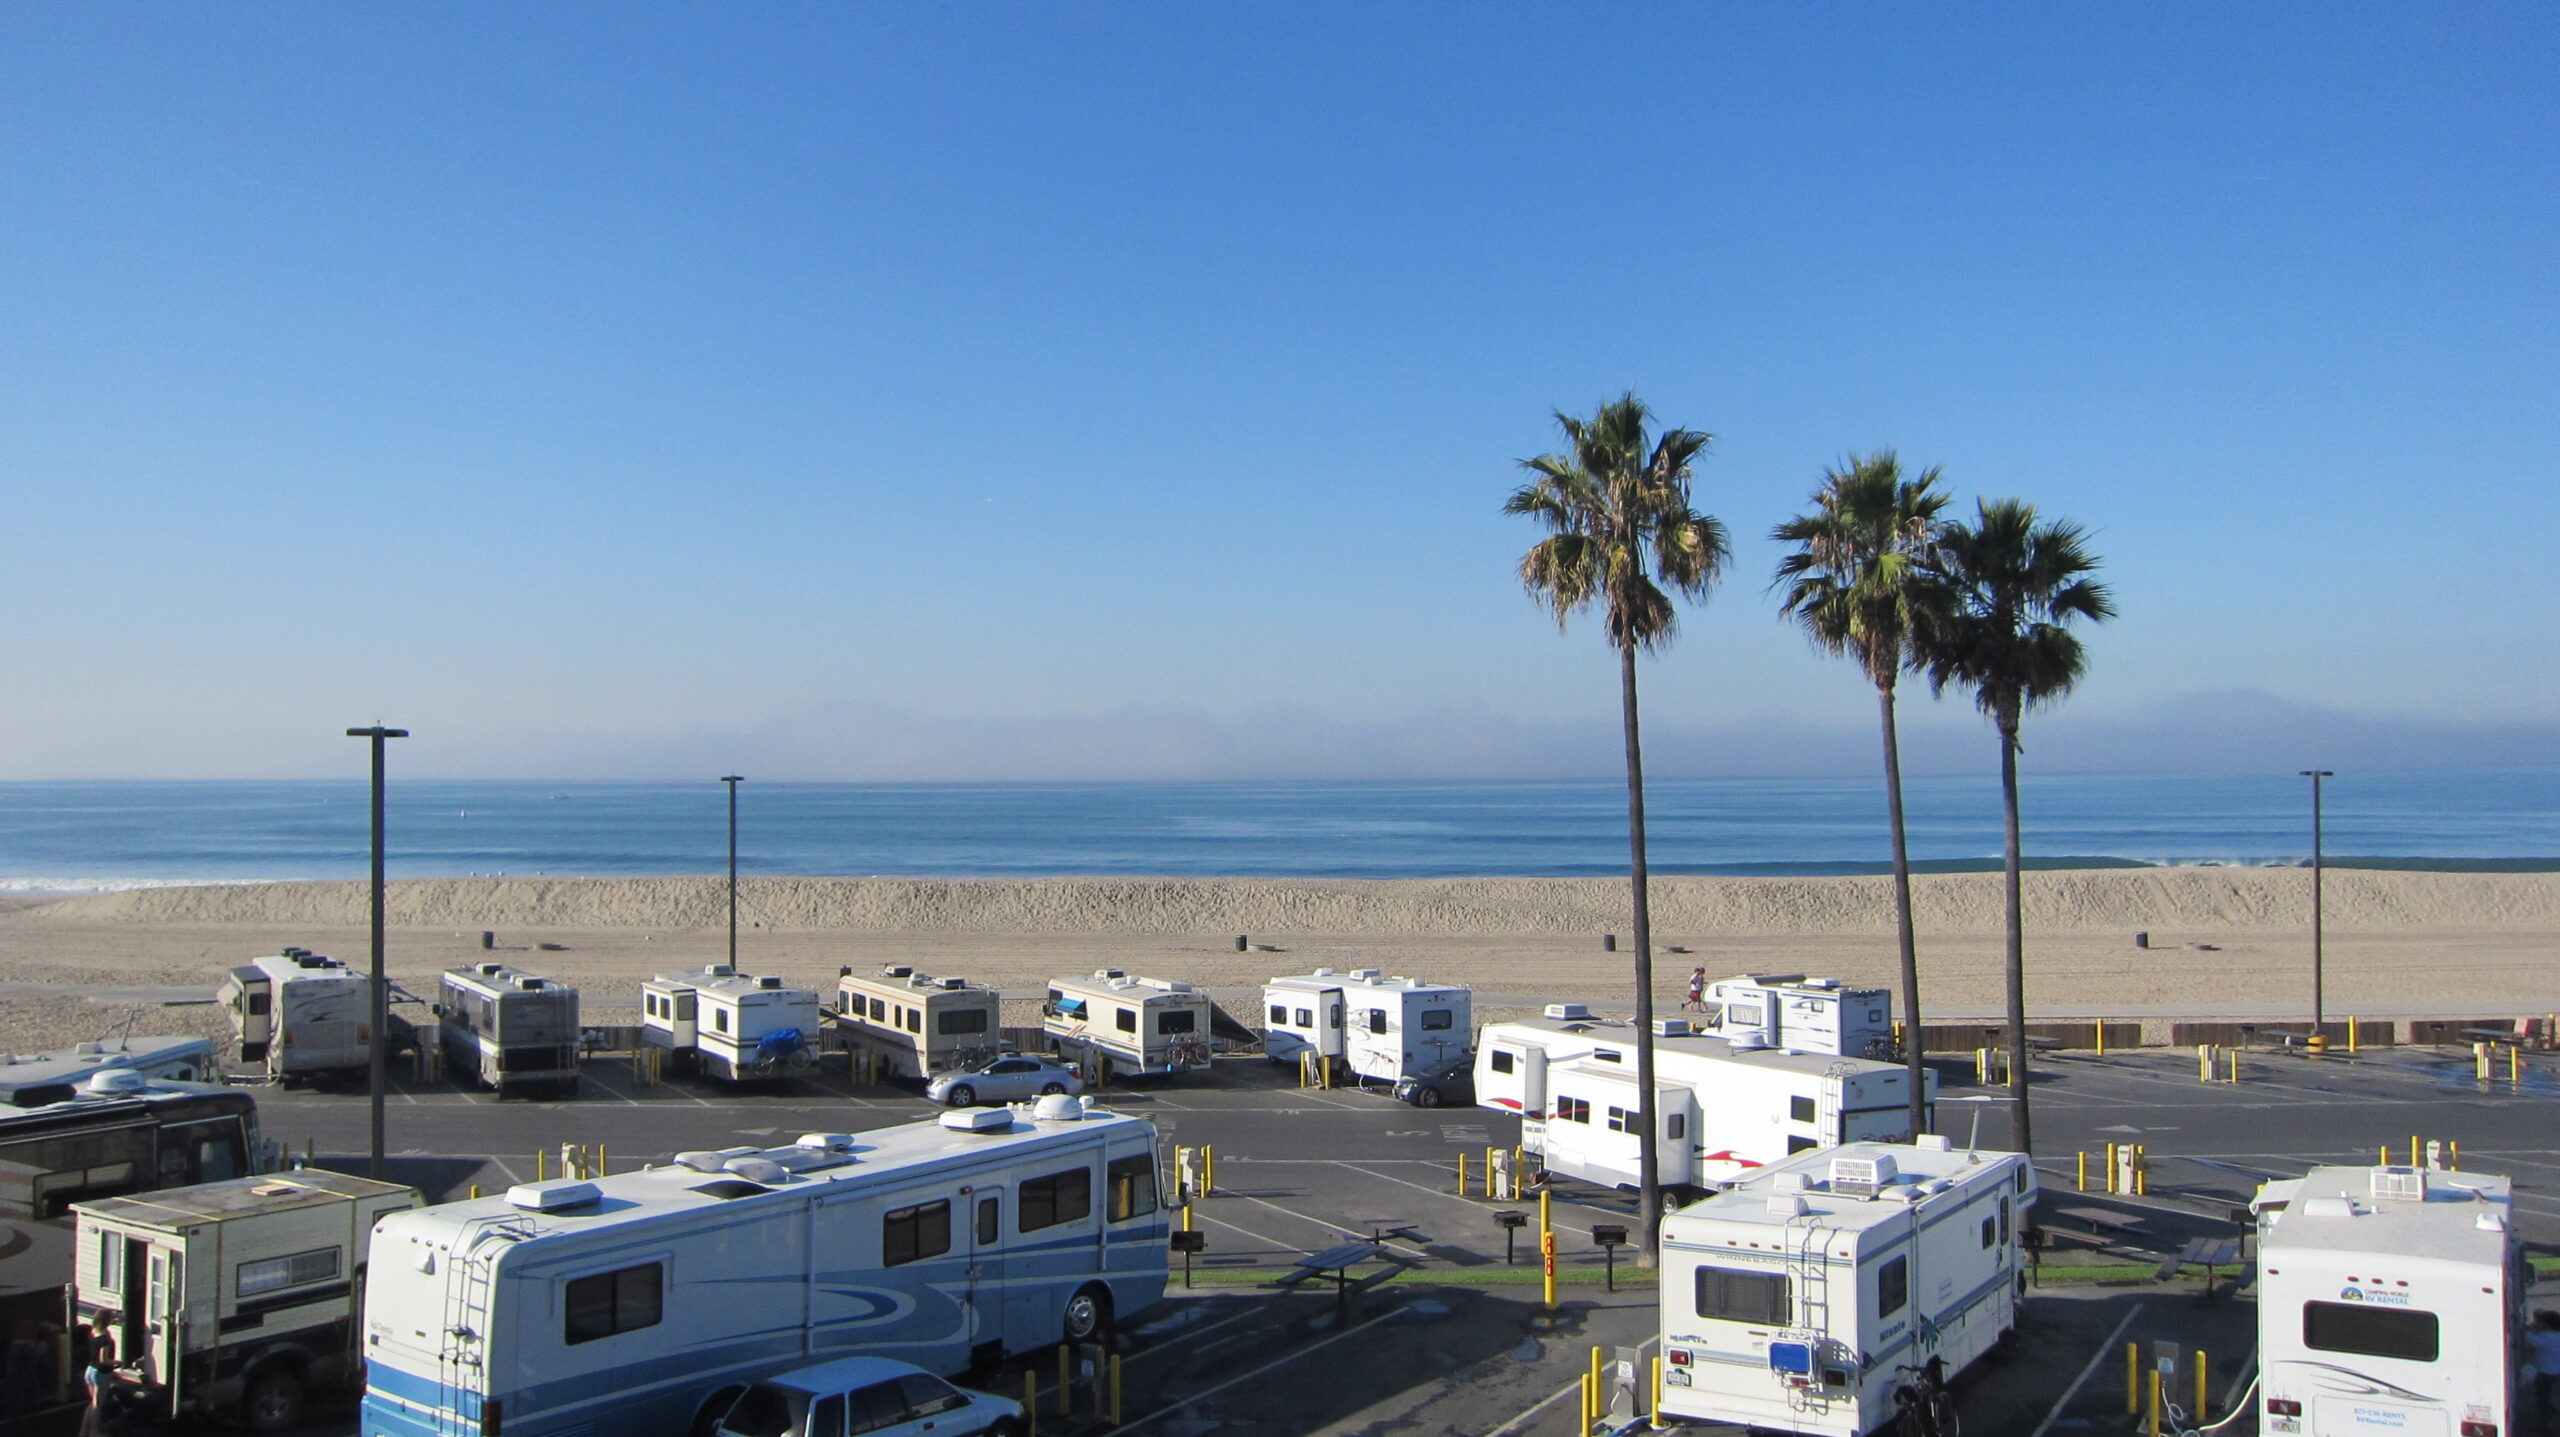 9 Best Campgrounds for Beach Camping in California